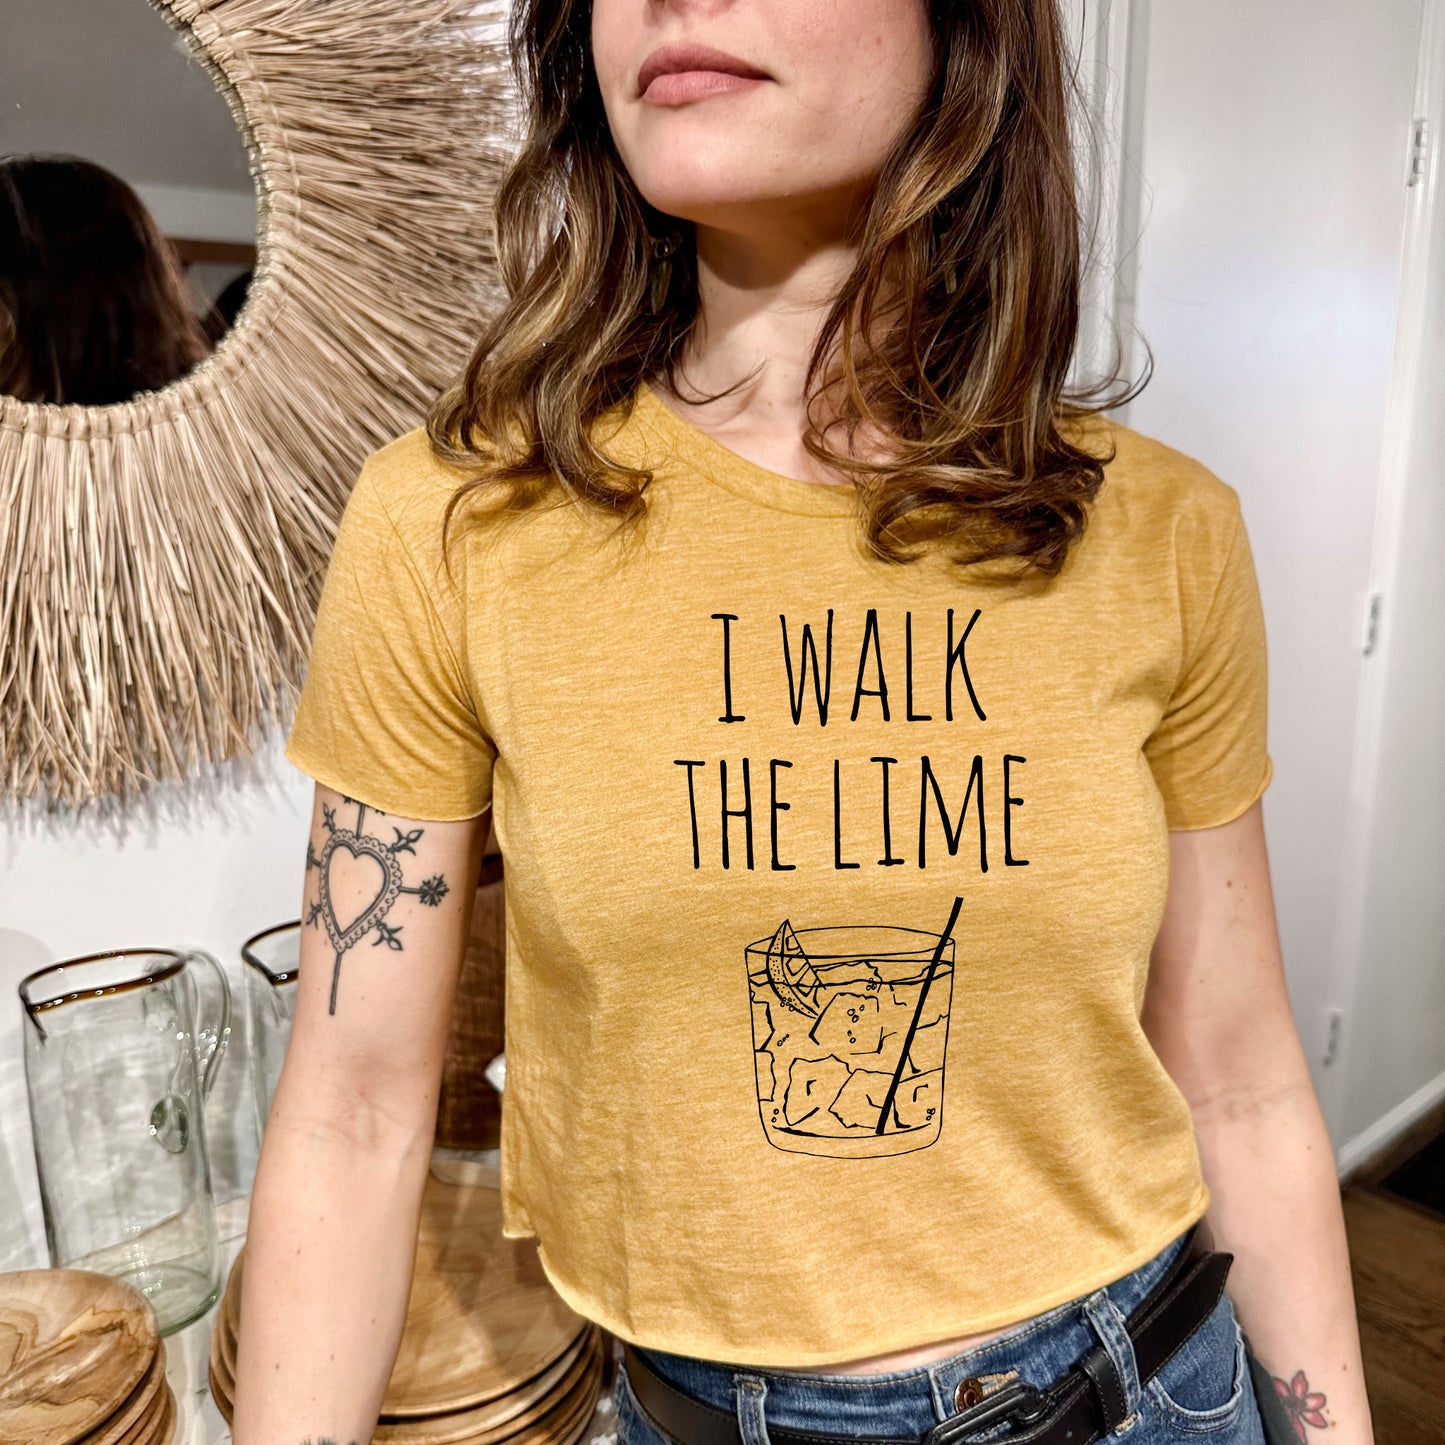 I Walk The Lime - Women's Crop Tee - Heather Gray or Gold